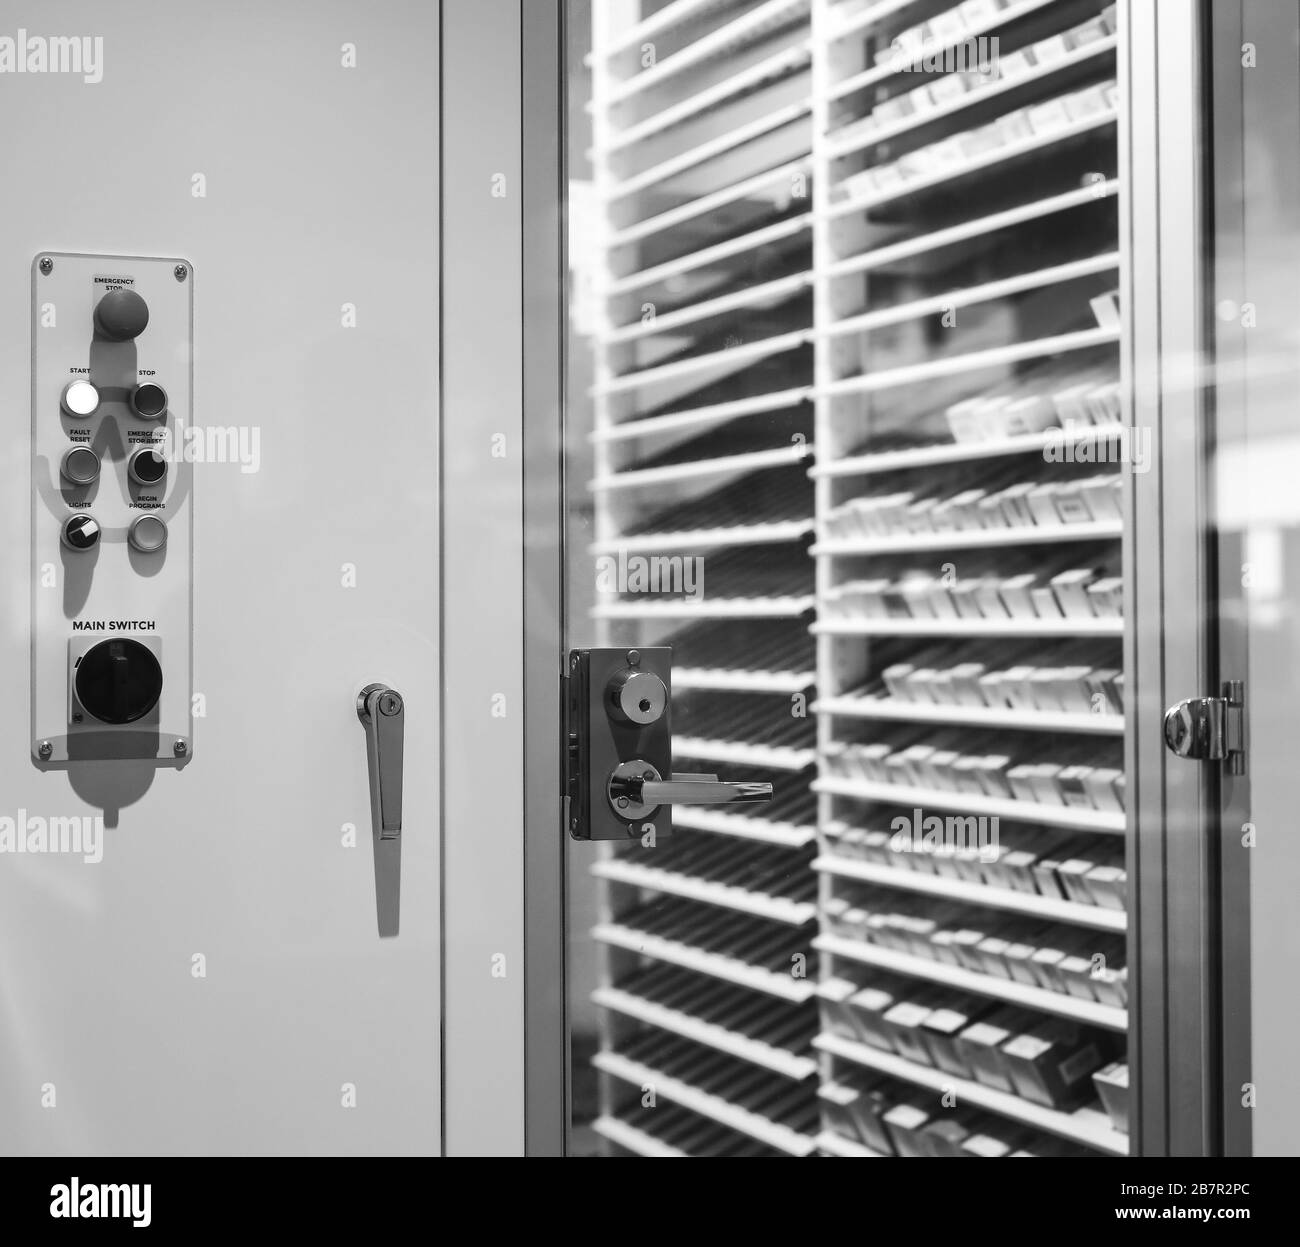 BEIJING, СHINA - JUNE 03: Closed pharmacy counter as healthcare concept. Stock Photo